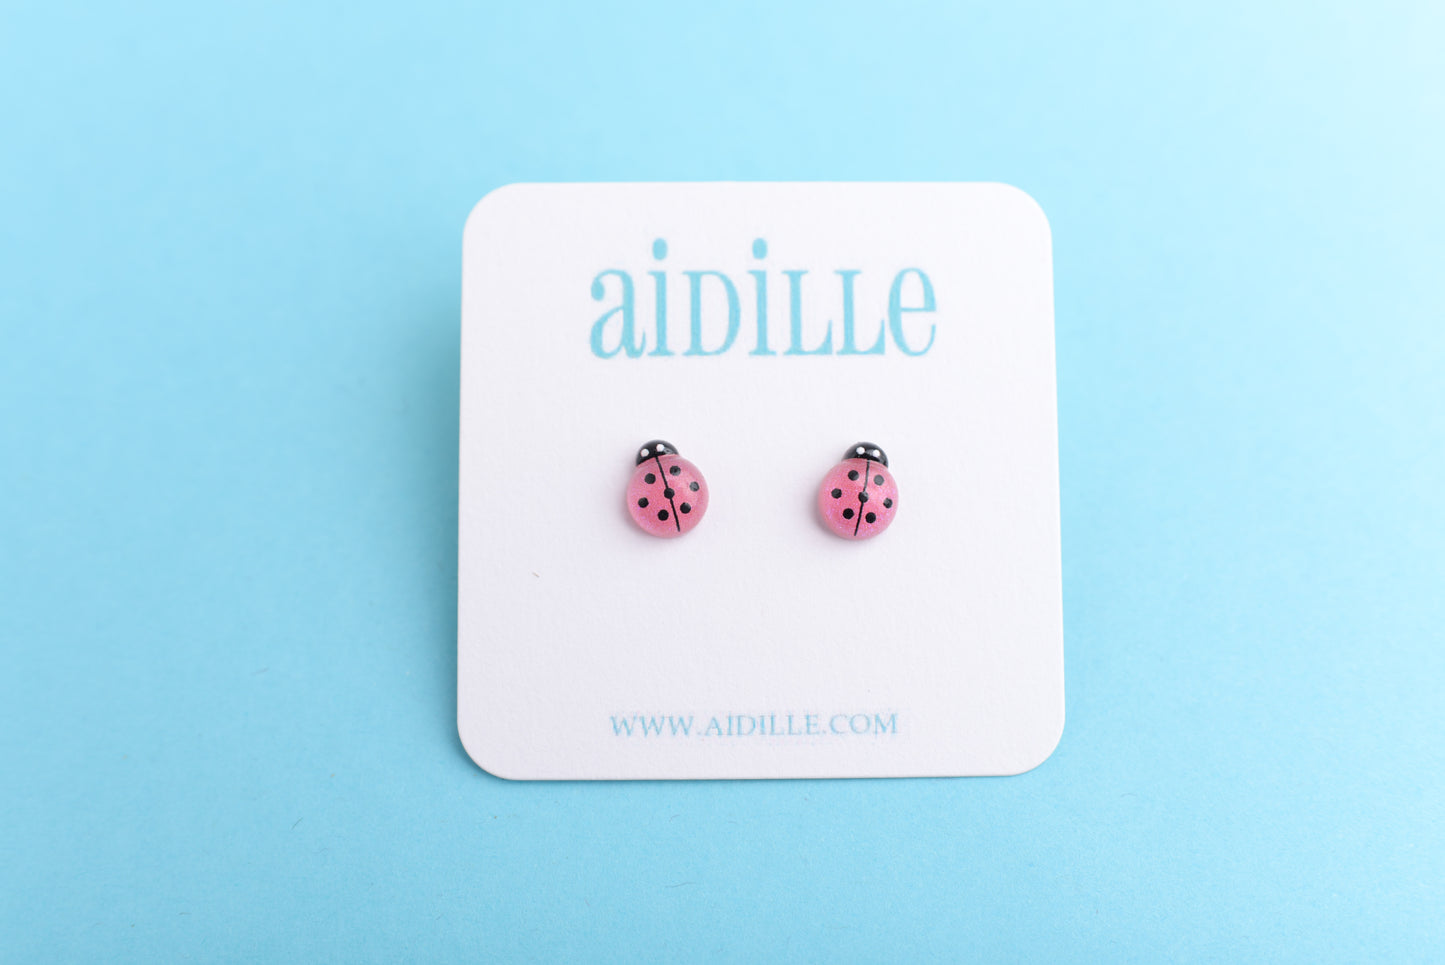 Little Ladybug Earrings with Titanium Posts- Choose from 8 Colors